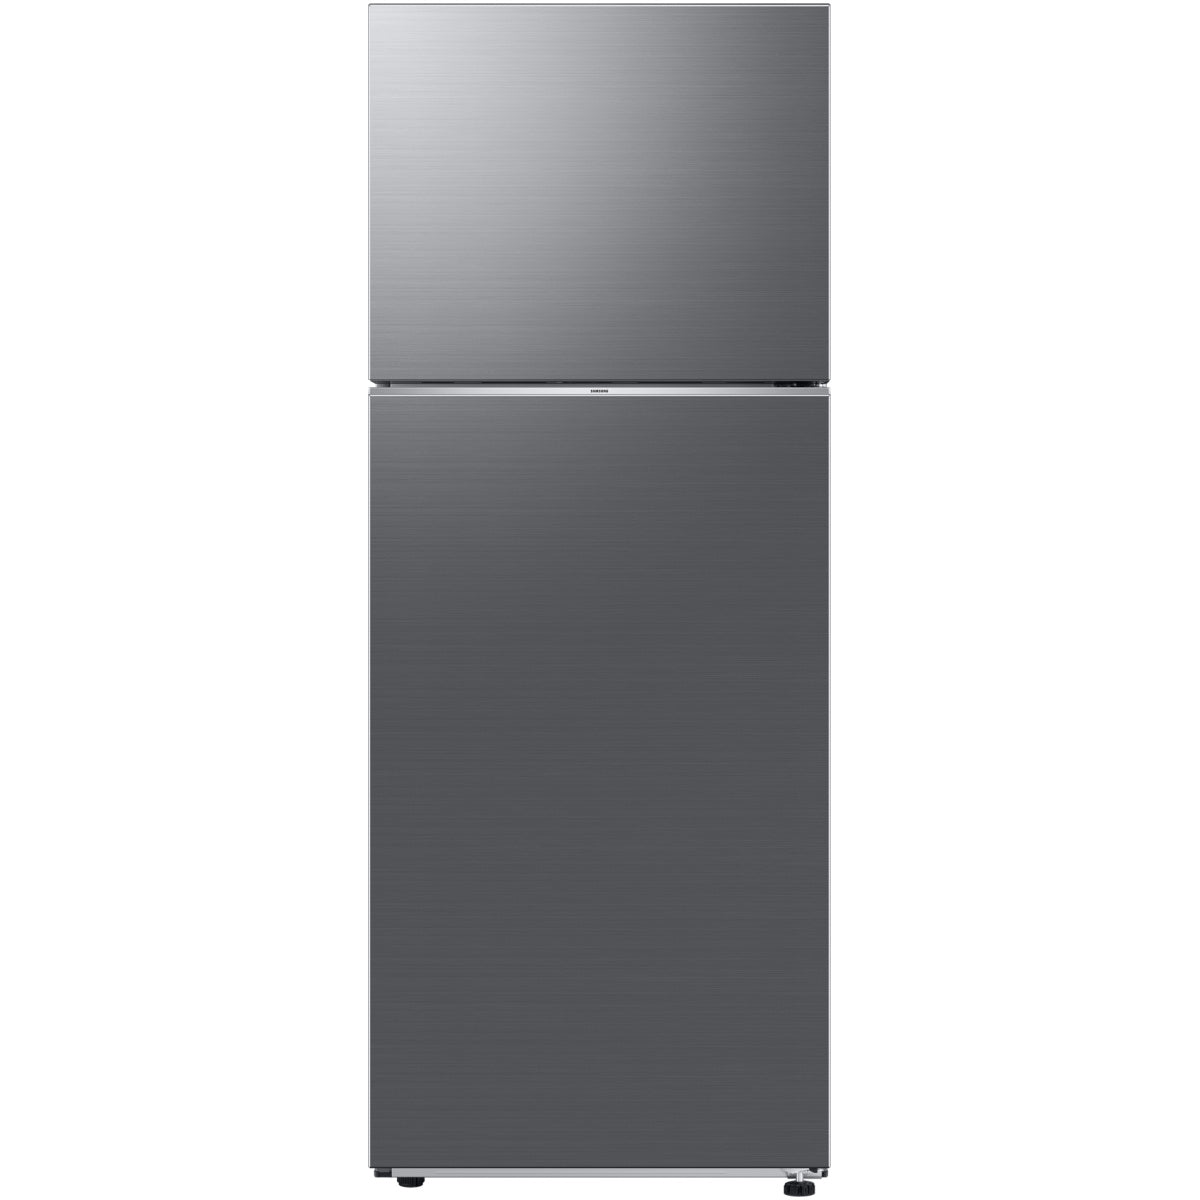 RT47CG6002S9JO/Samsung Top Mount Freezer Refrigerator with Optimal Fresh+, 463L Net Capacity YES / A+ / 460L